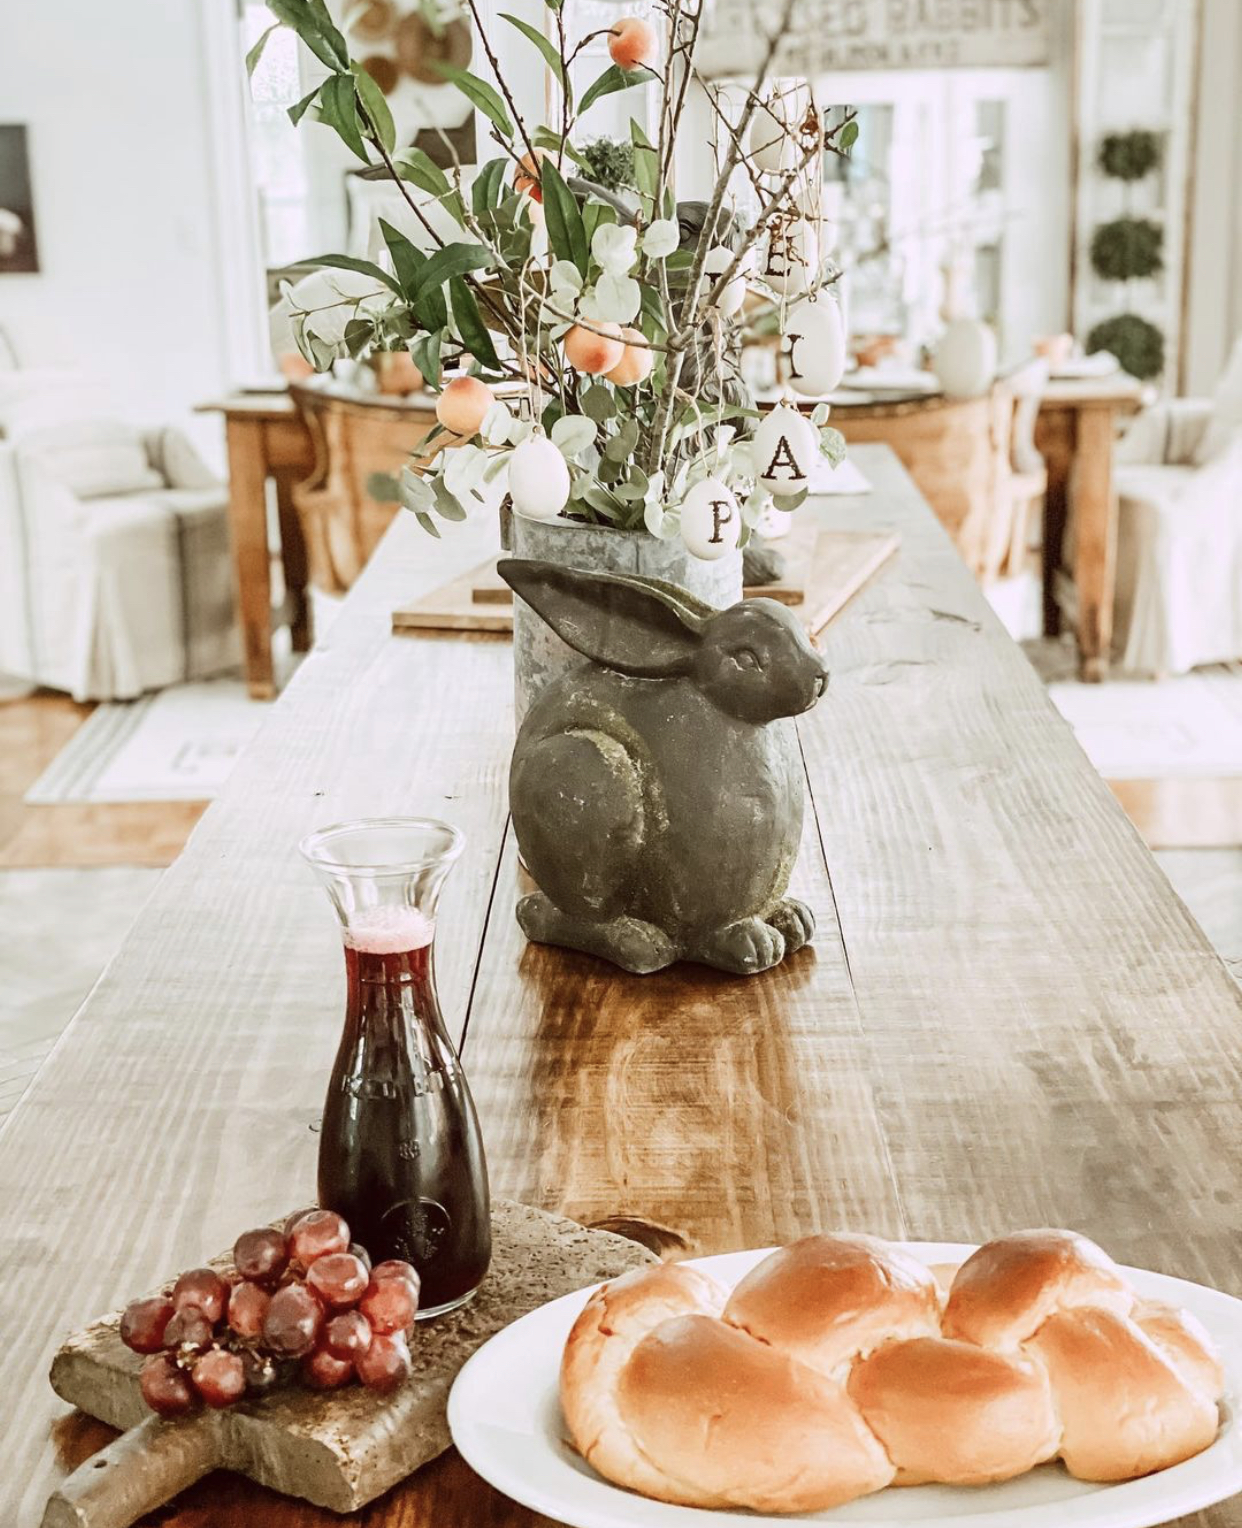 beautiful arrangement of grapes and bread for Easter communion at home